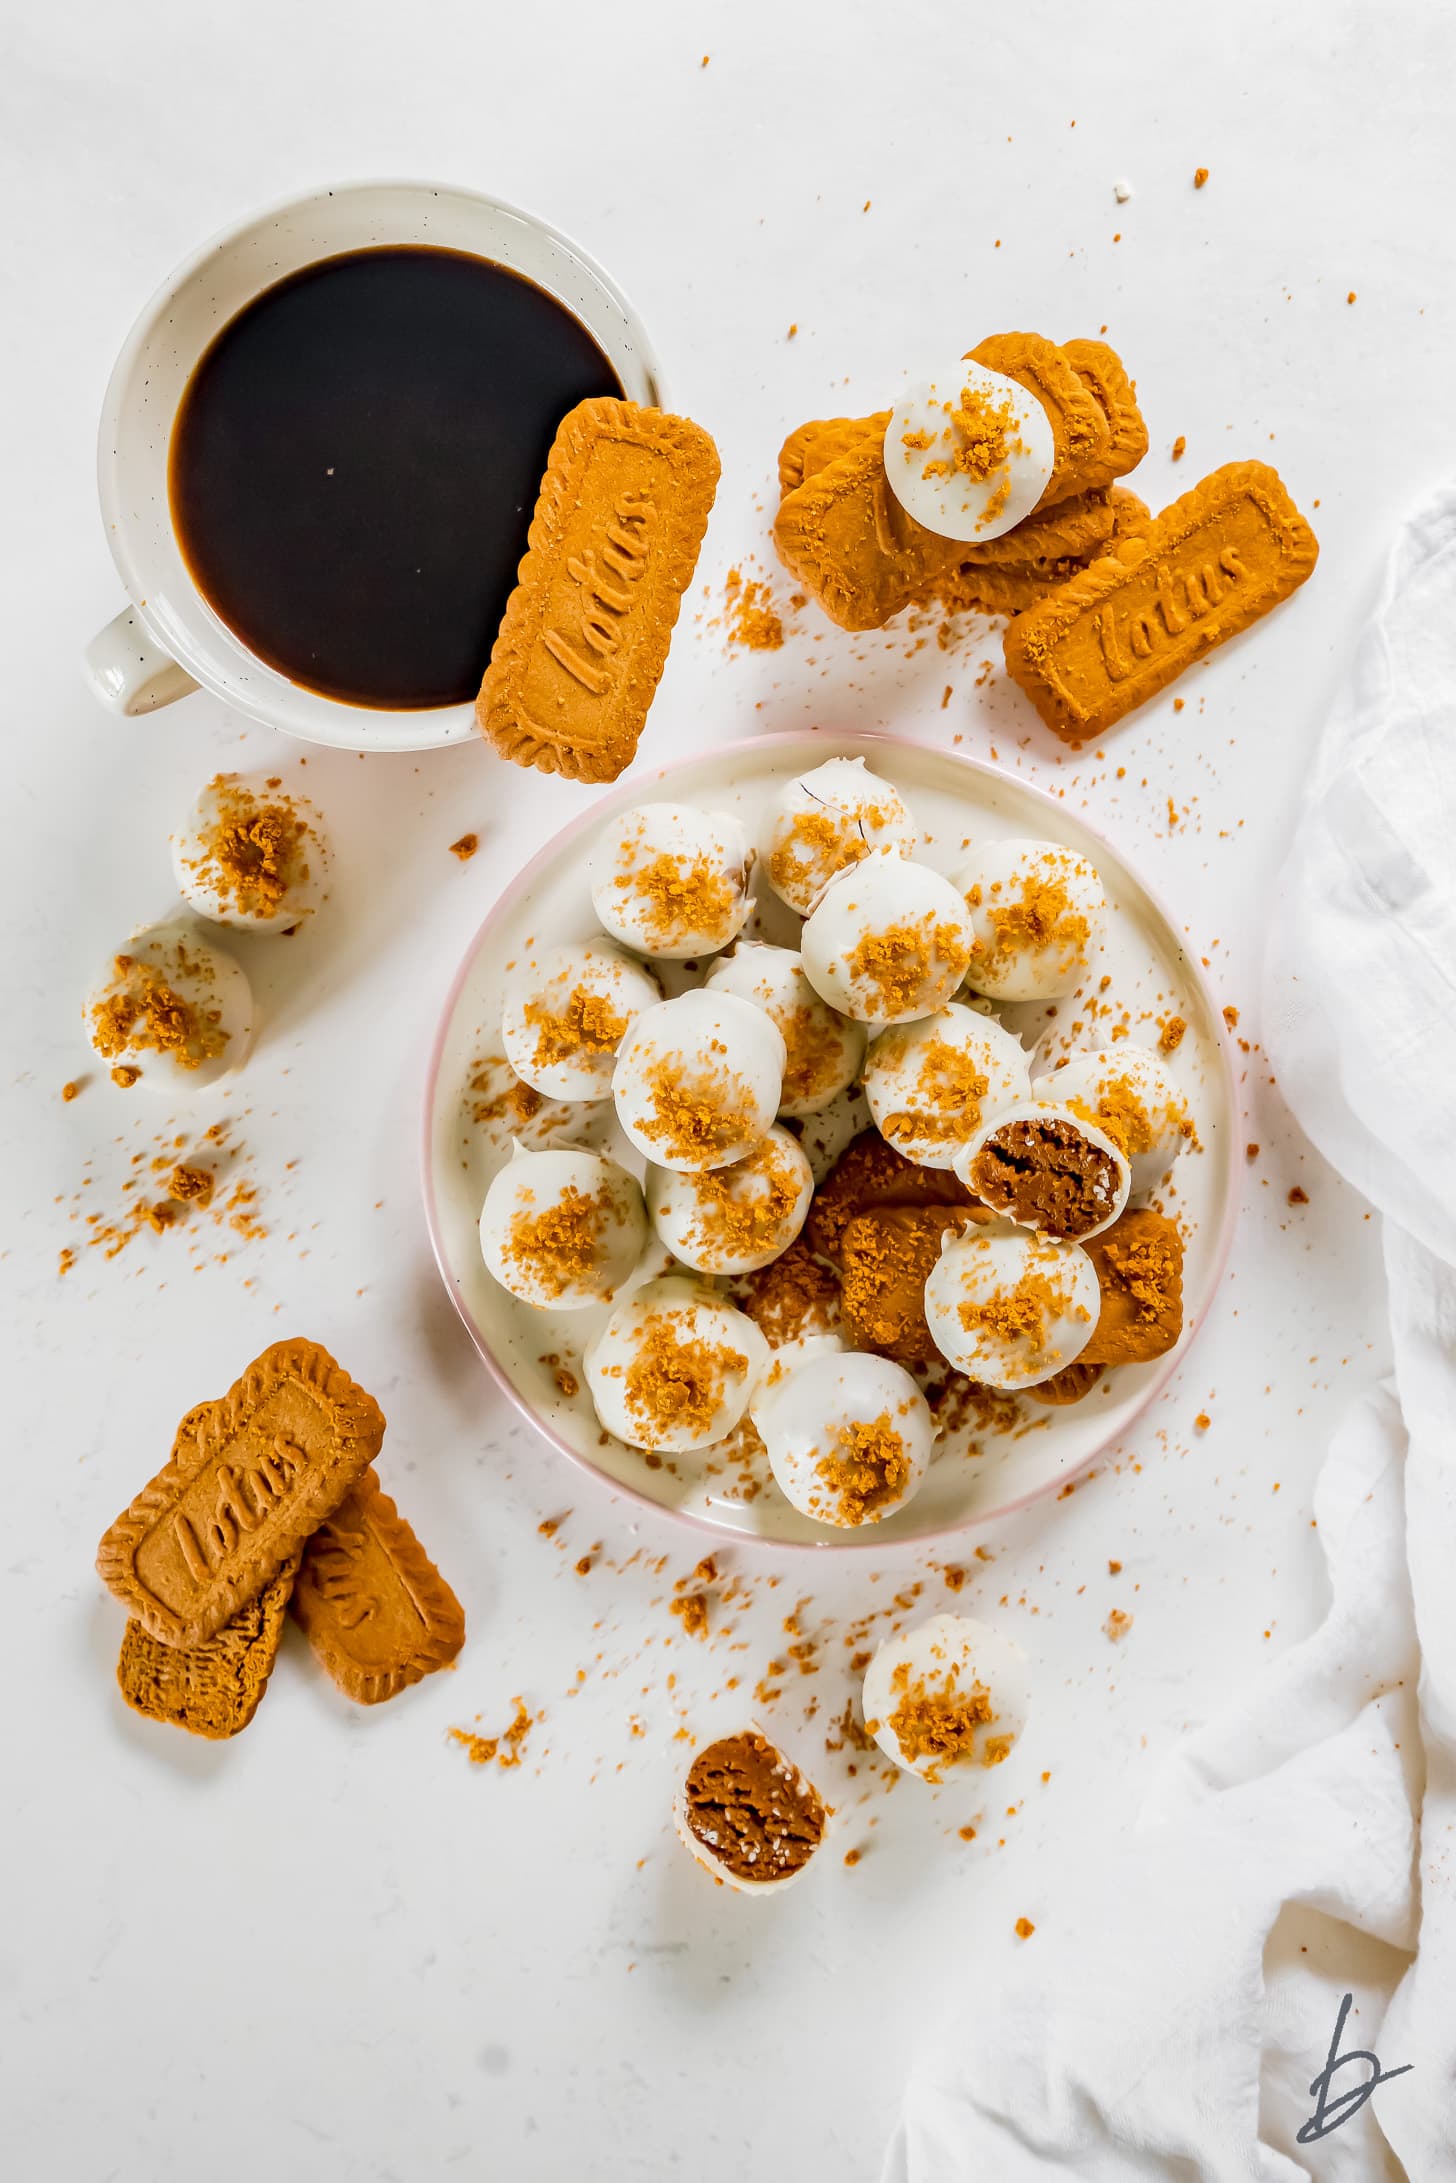 plate of white-chocolate covered biscoff truffles with cookie crumbs next to more biscoff cookies and mug of coffee